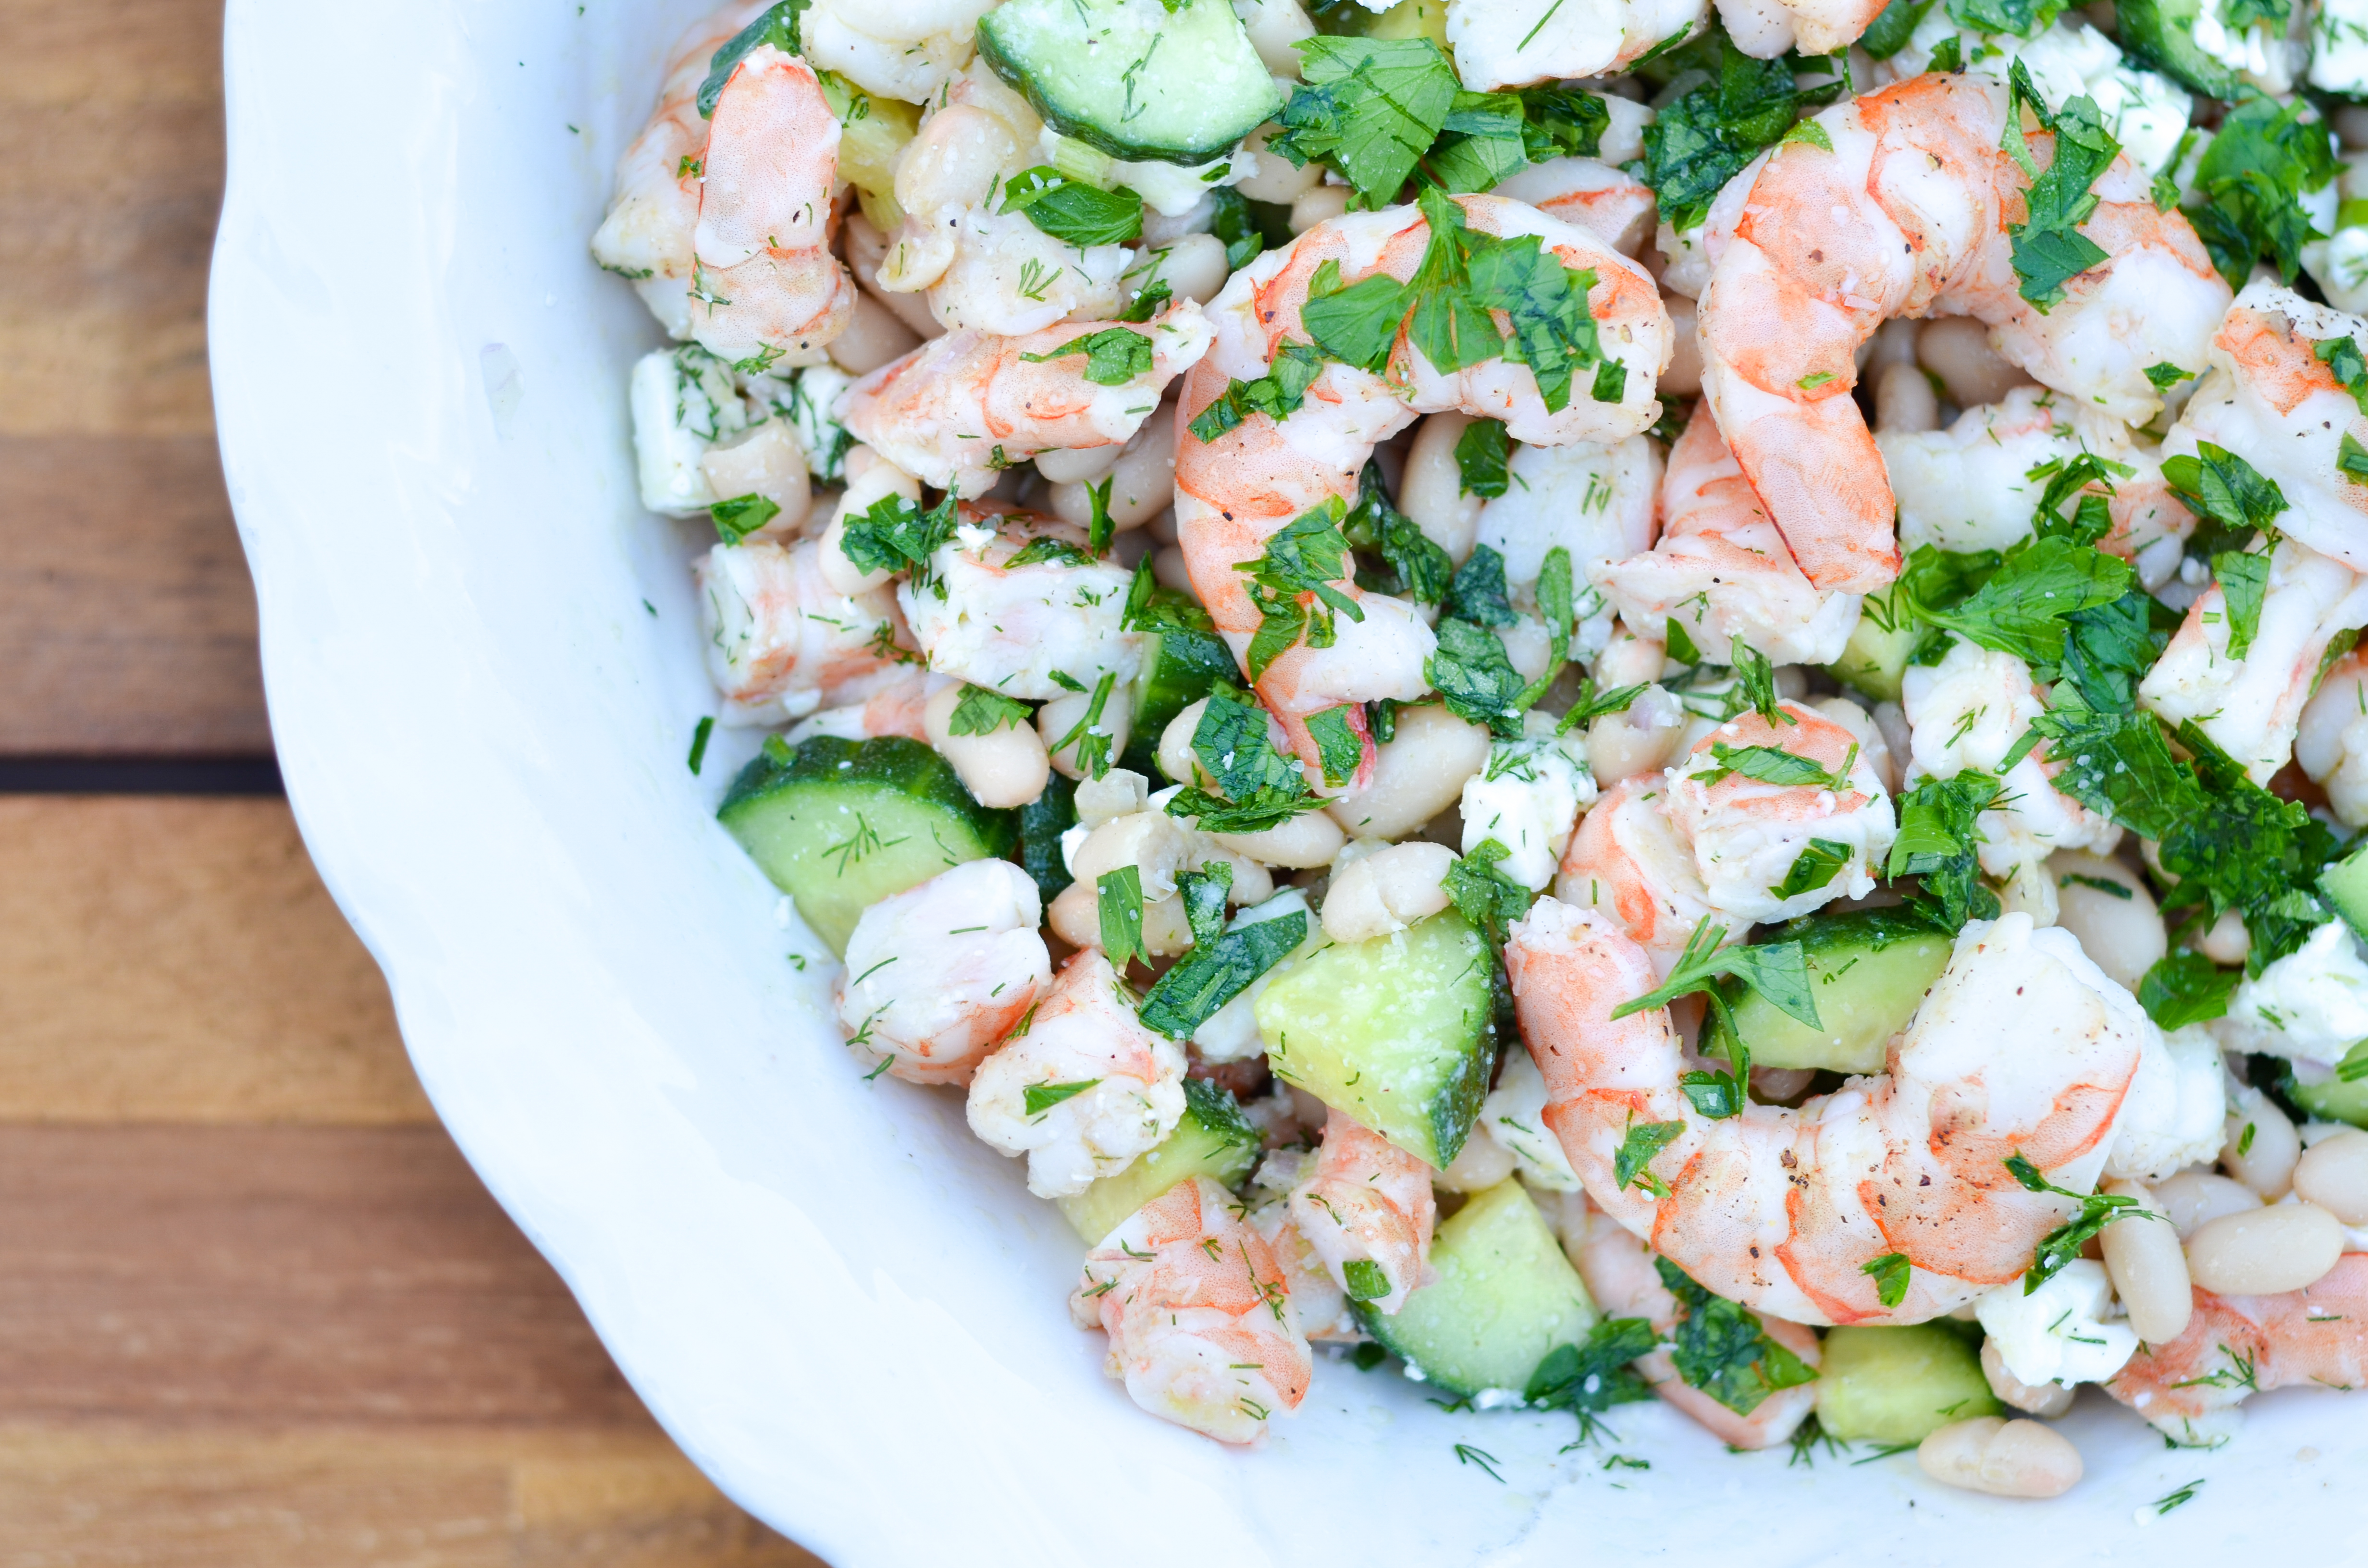 https://www.thechroniclesofhome.com/wp-content/uploads/2017/04/summer-shrimp-salad-3.jpg